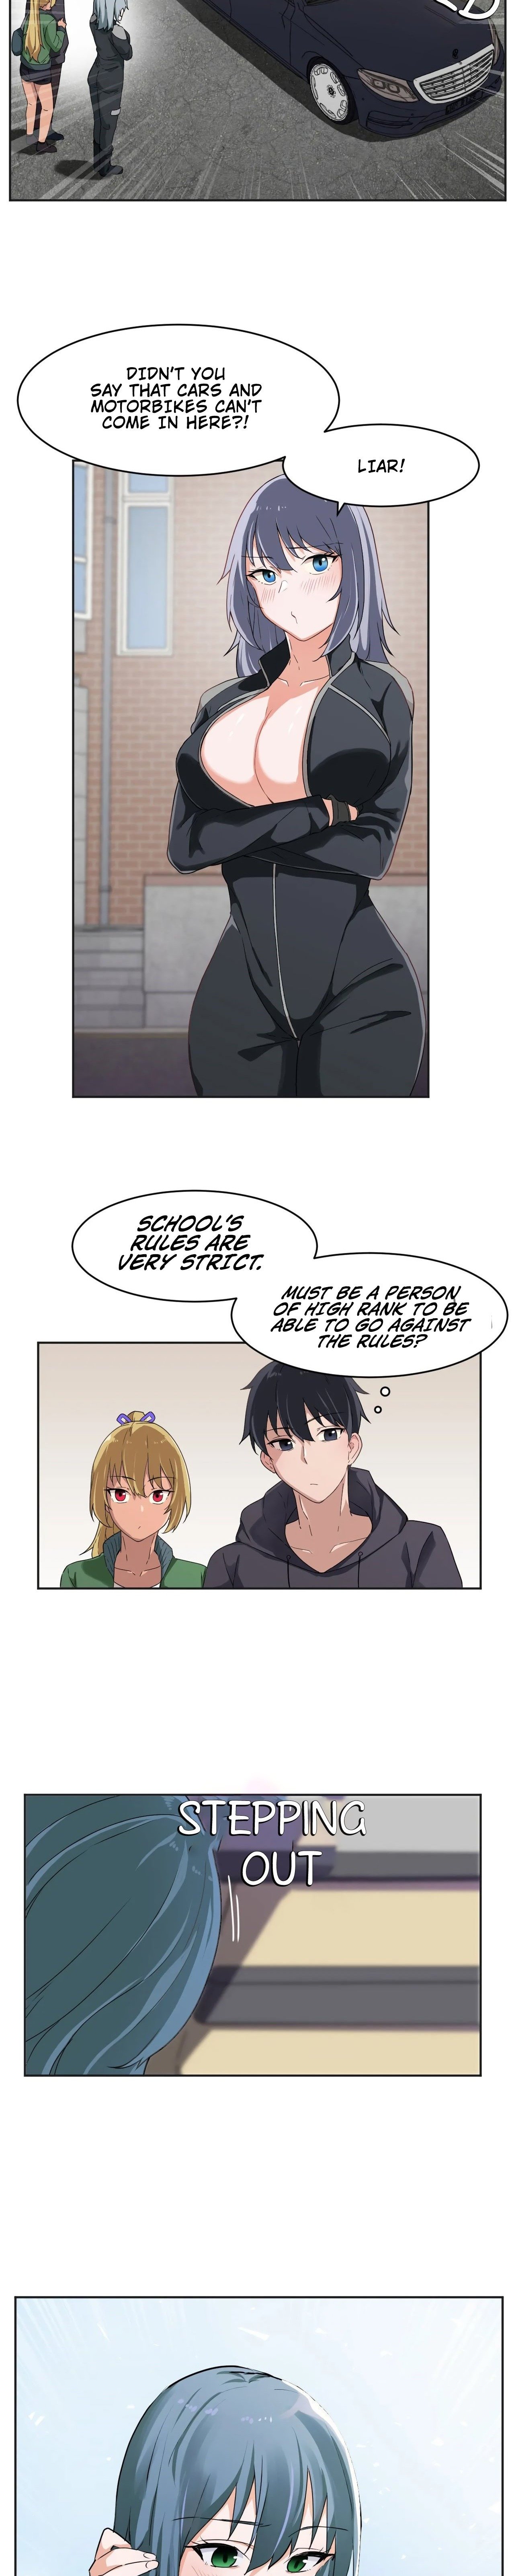 i-wanna-be-a-daughter-thief-chap-3-19